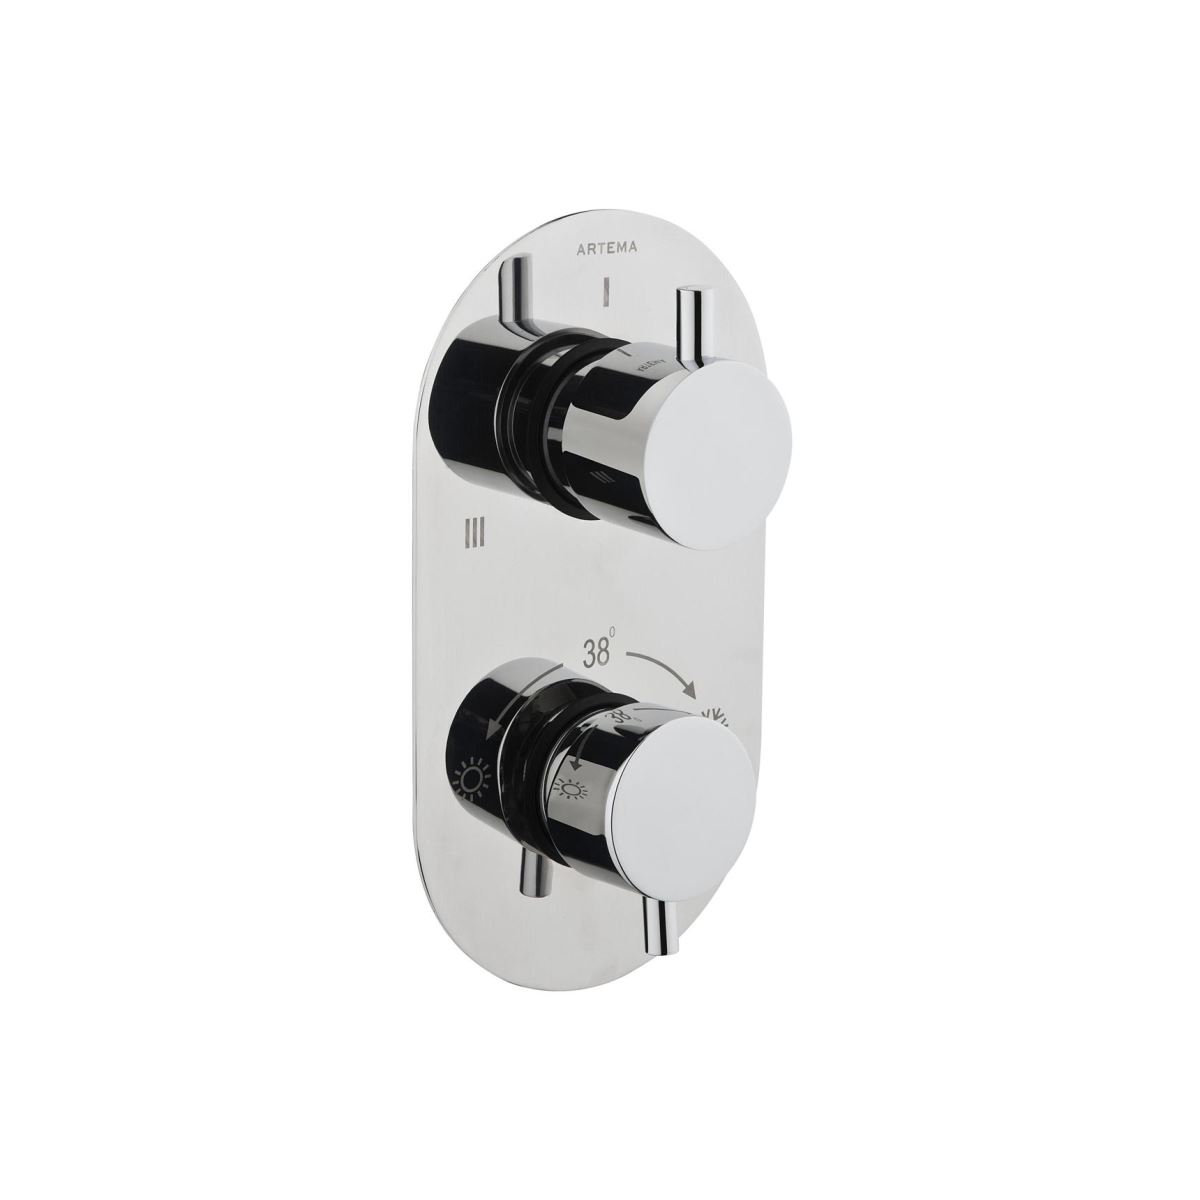 Aquatech Built-in Thermostatic Bath/Shower Mixer (180° Turn – 1+3 Way Diverter)